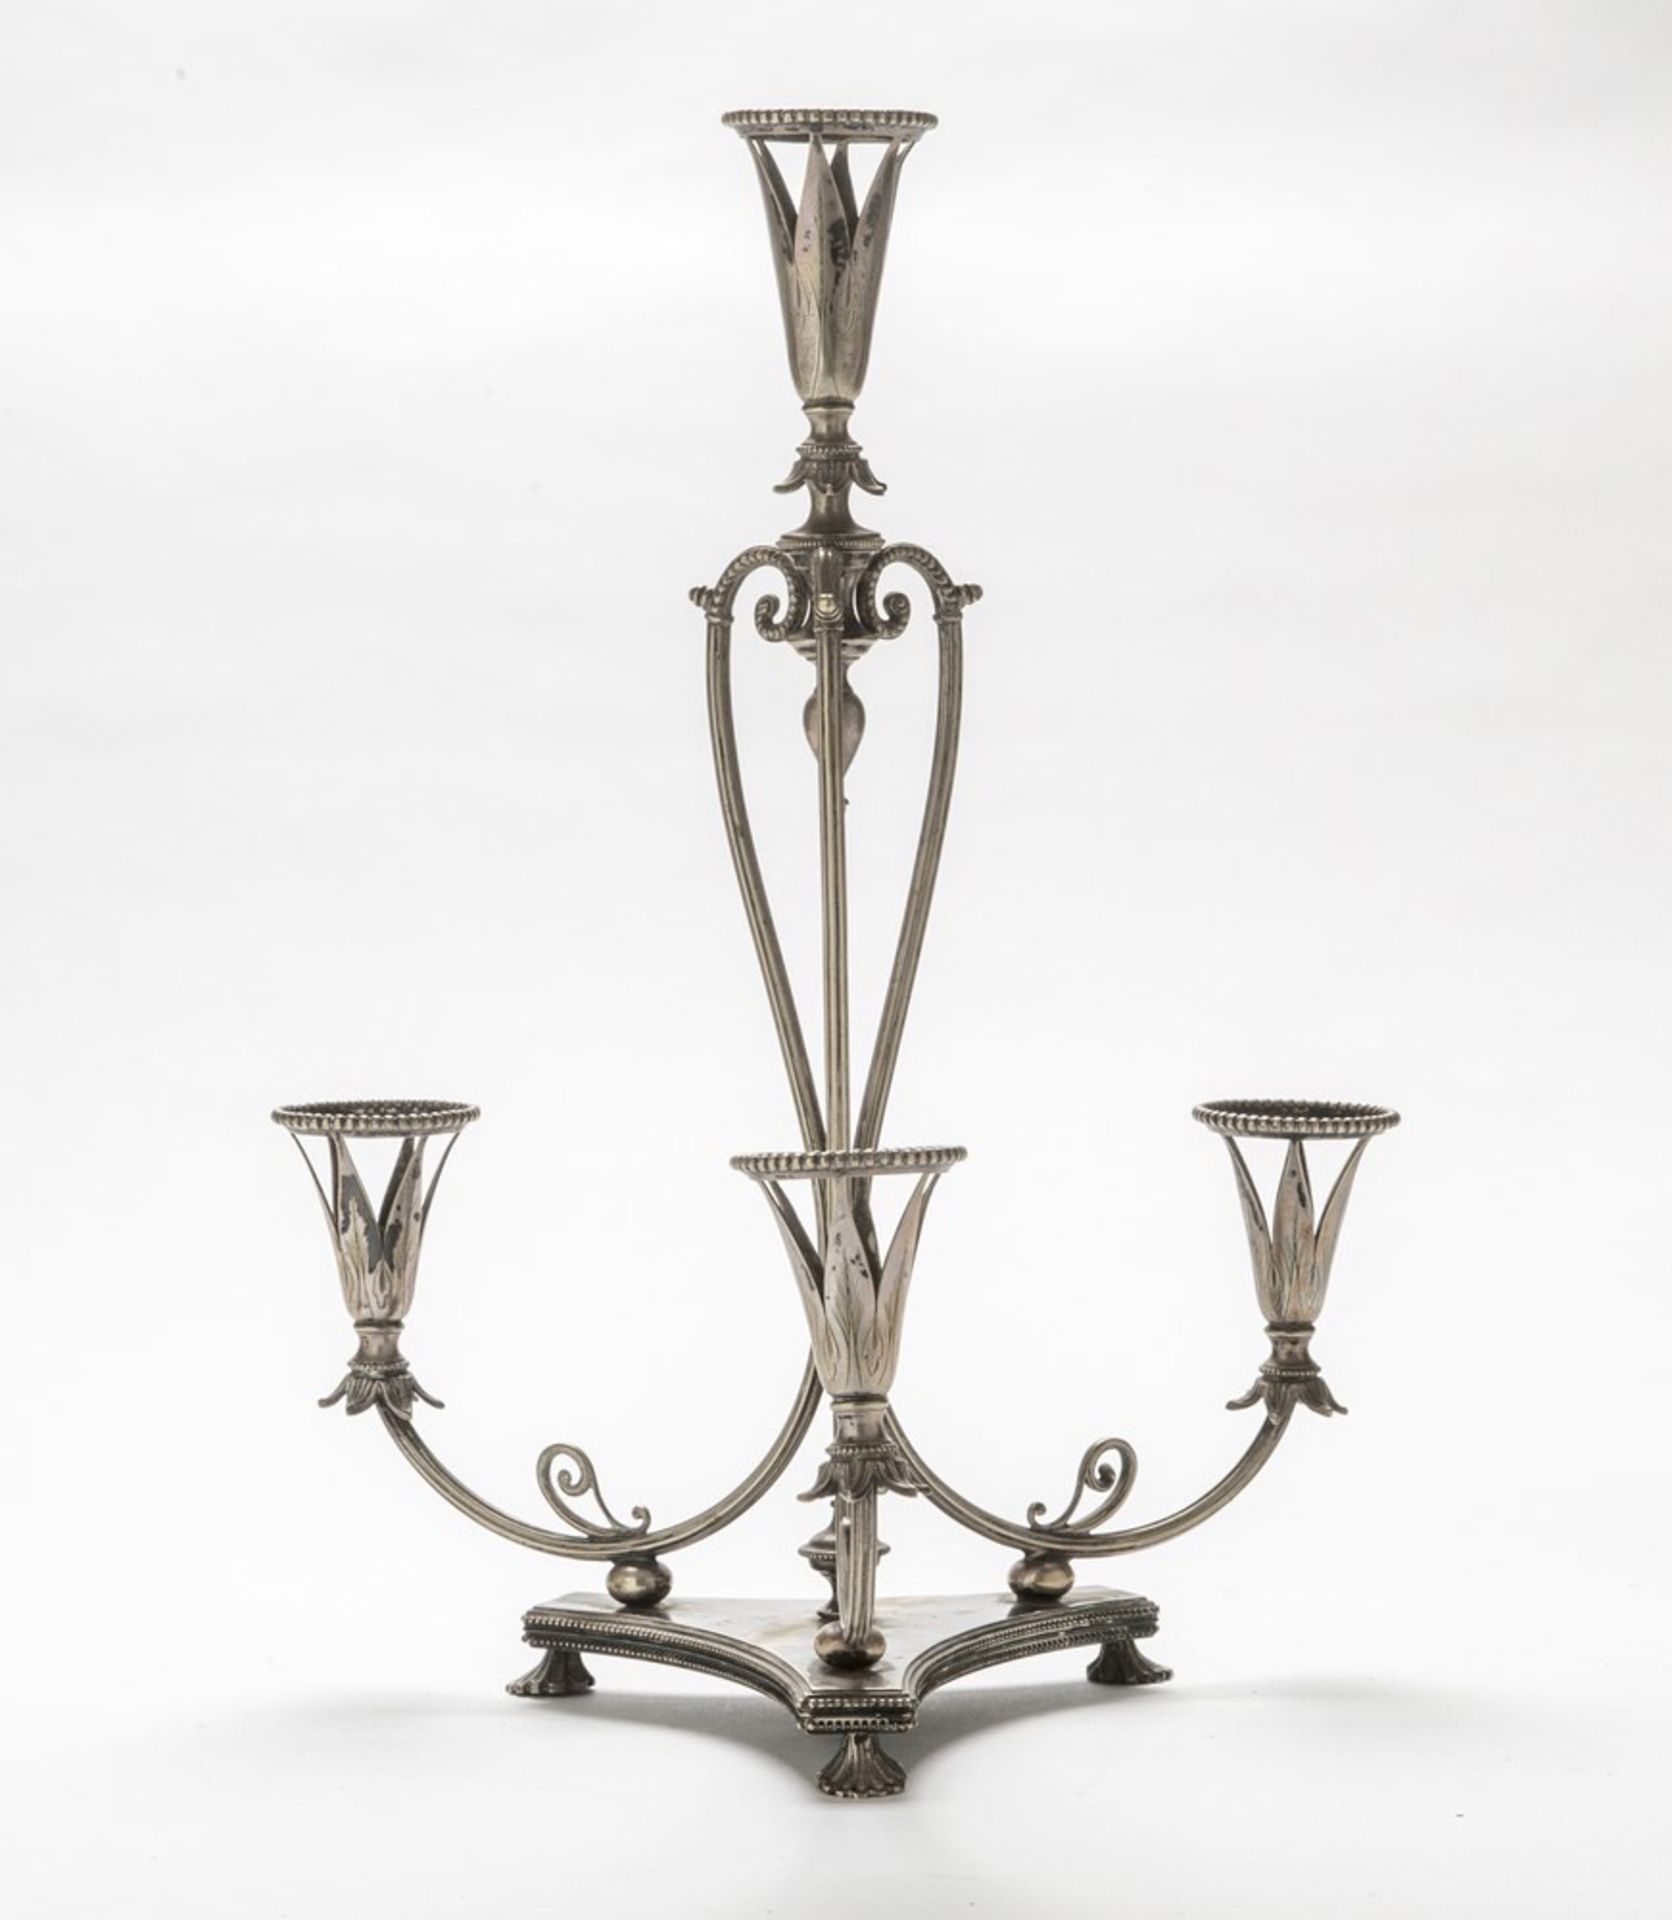 SILVER-PLATED EGG CUP, LATE 19TH CENTURY of three arms, triangle basement with fluted feet. Measures